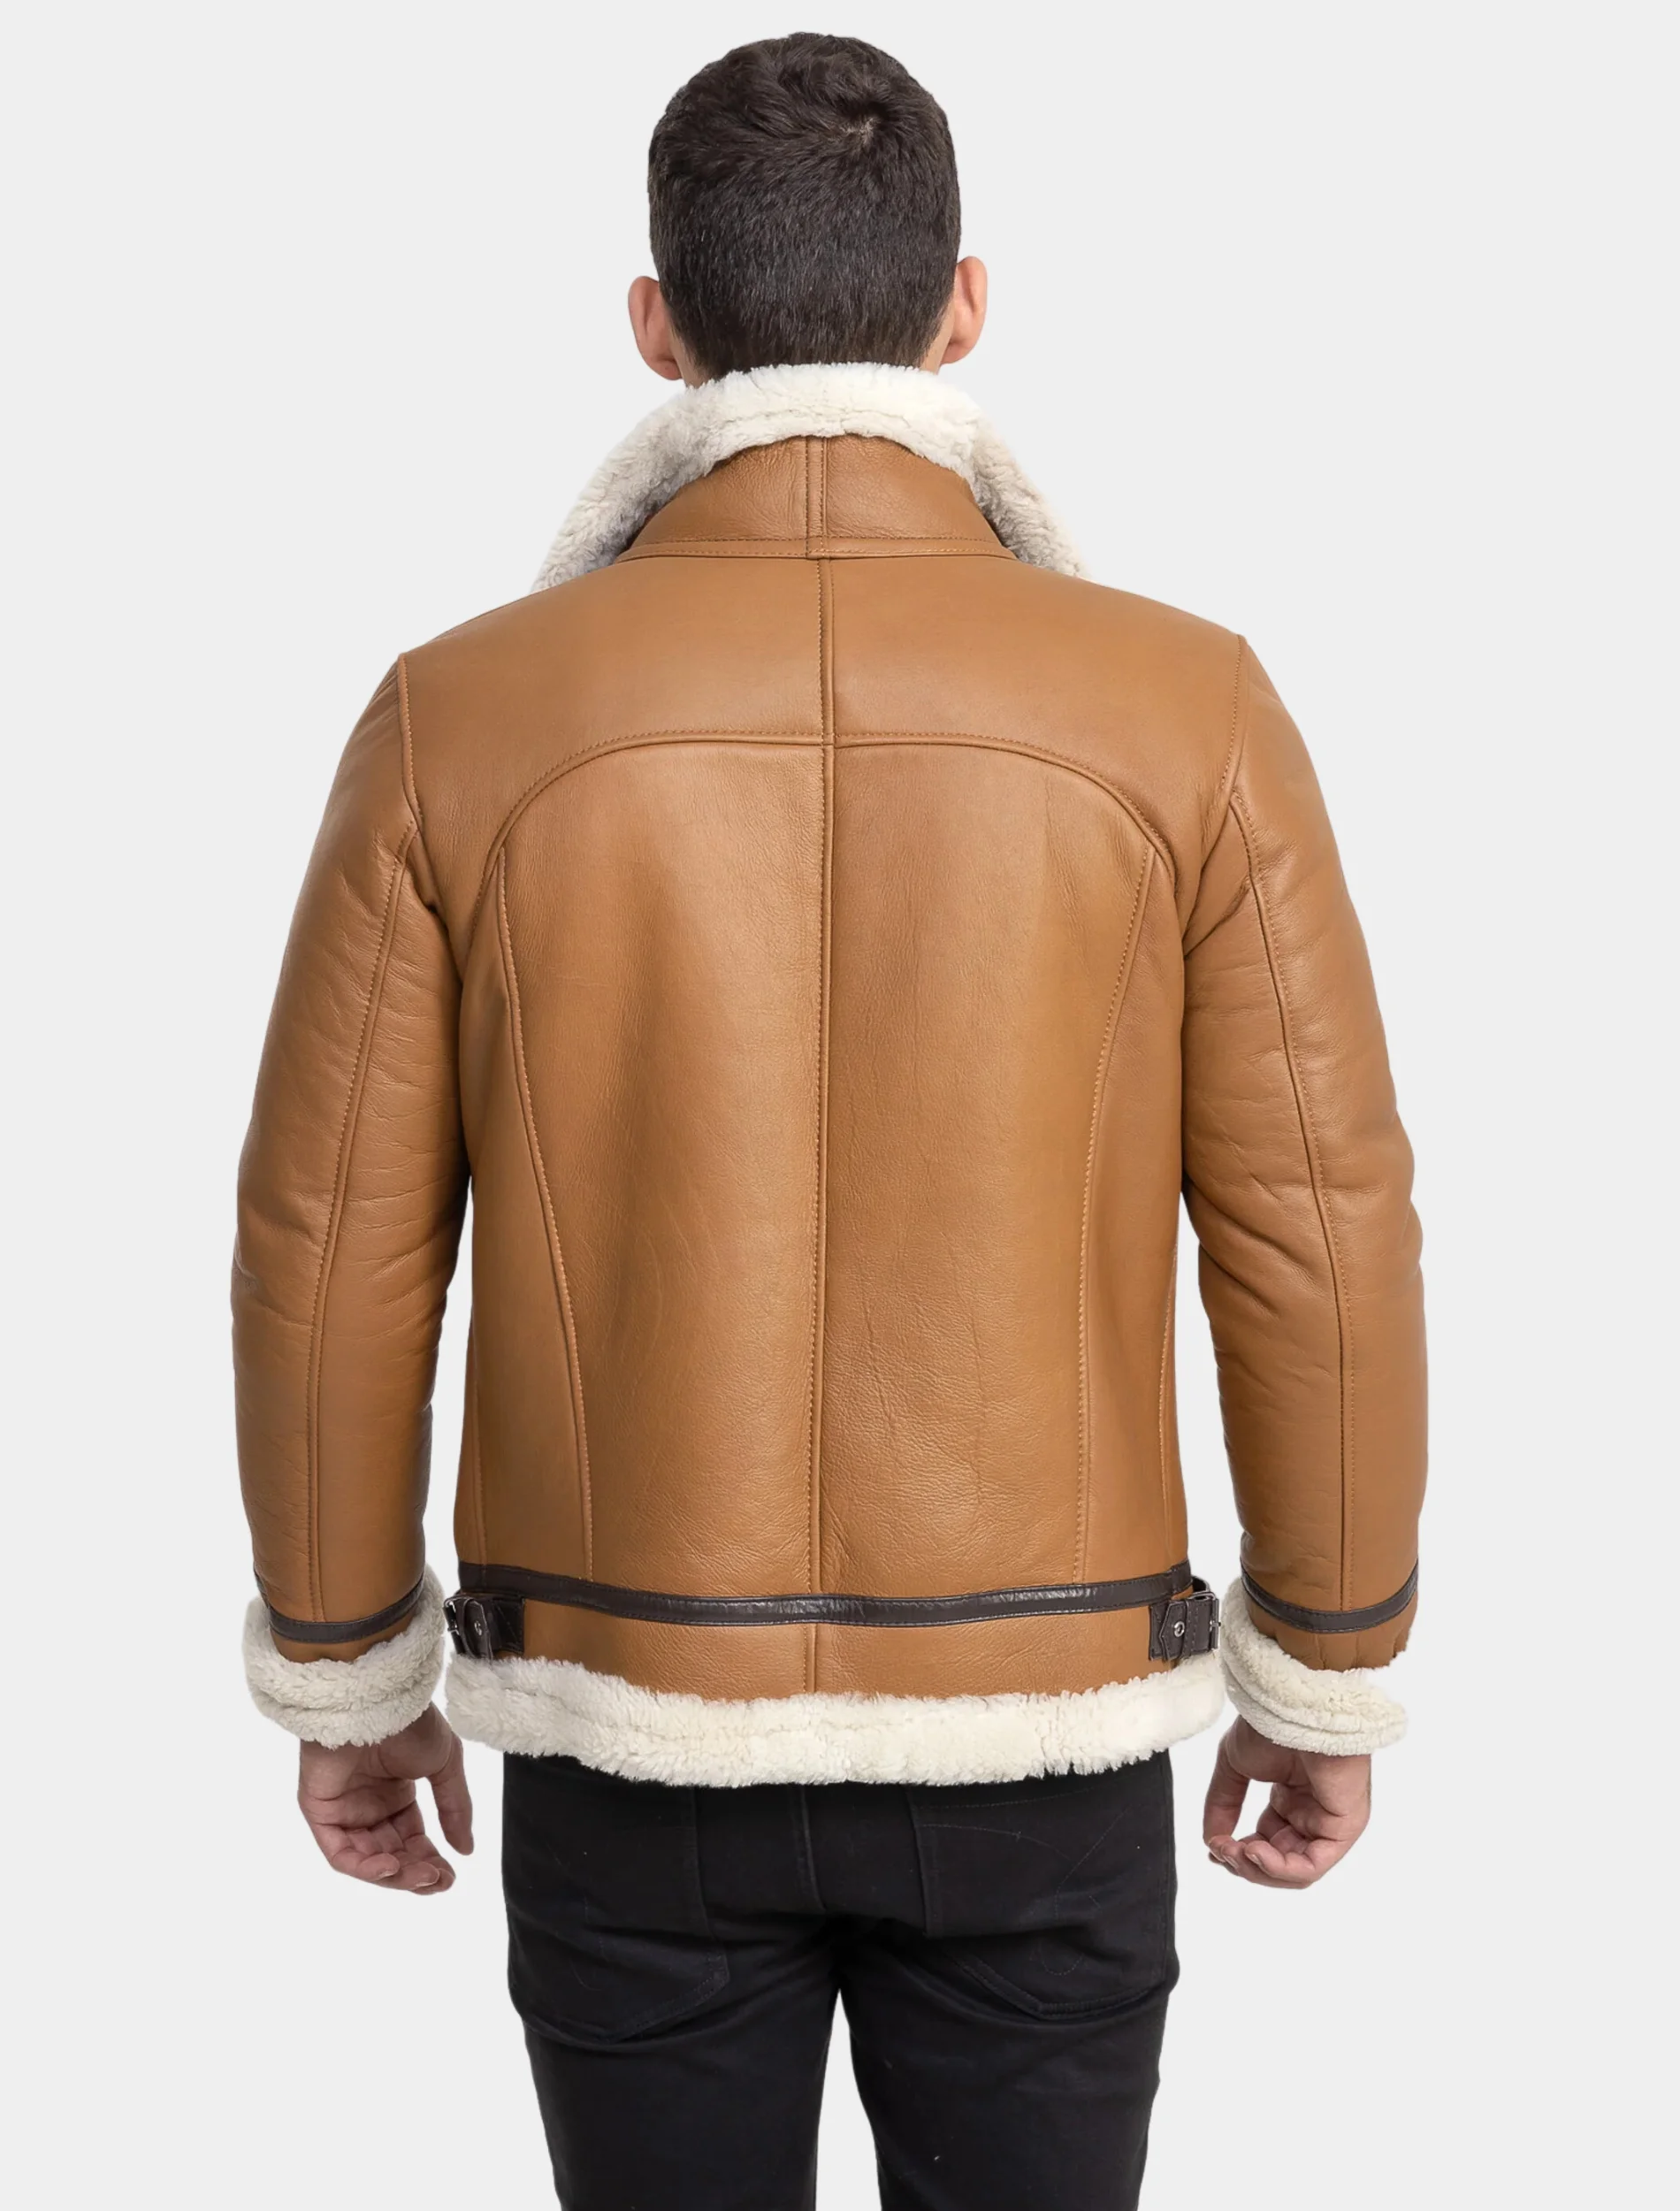 Mens Classy Tan Brown Leather White Shearling Aviator Jacket Back